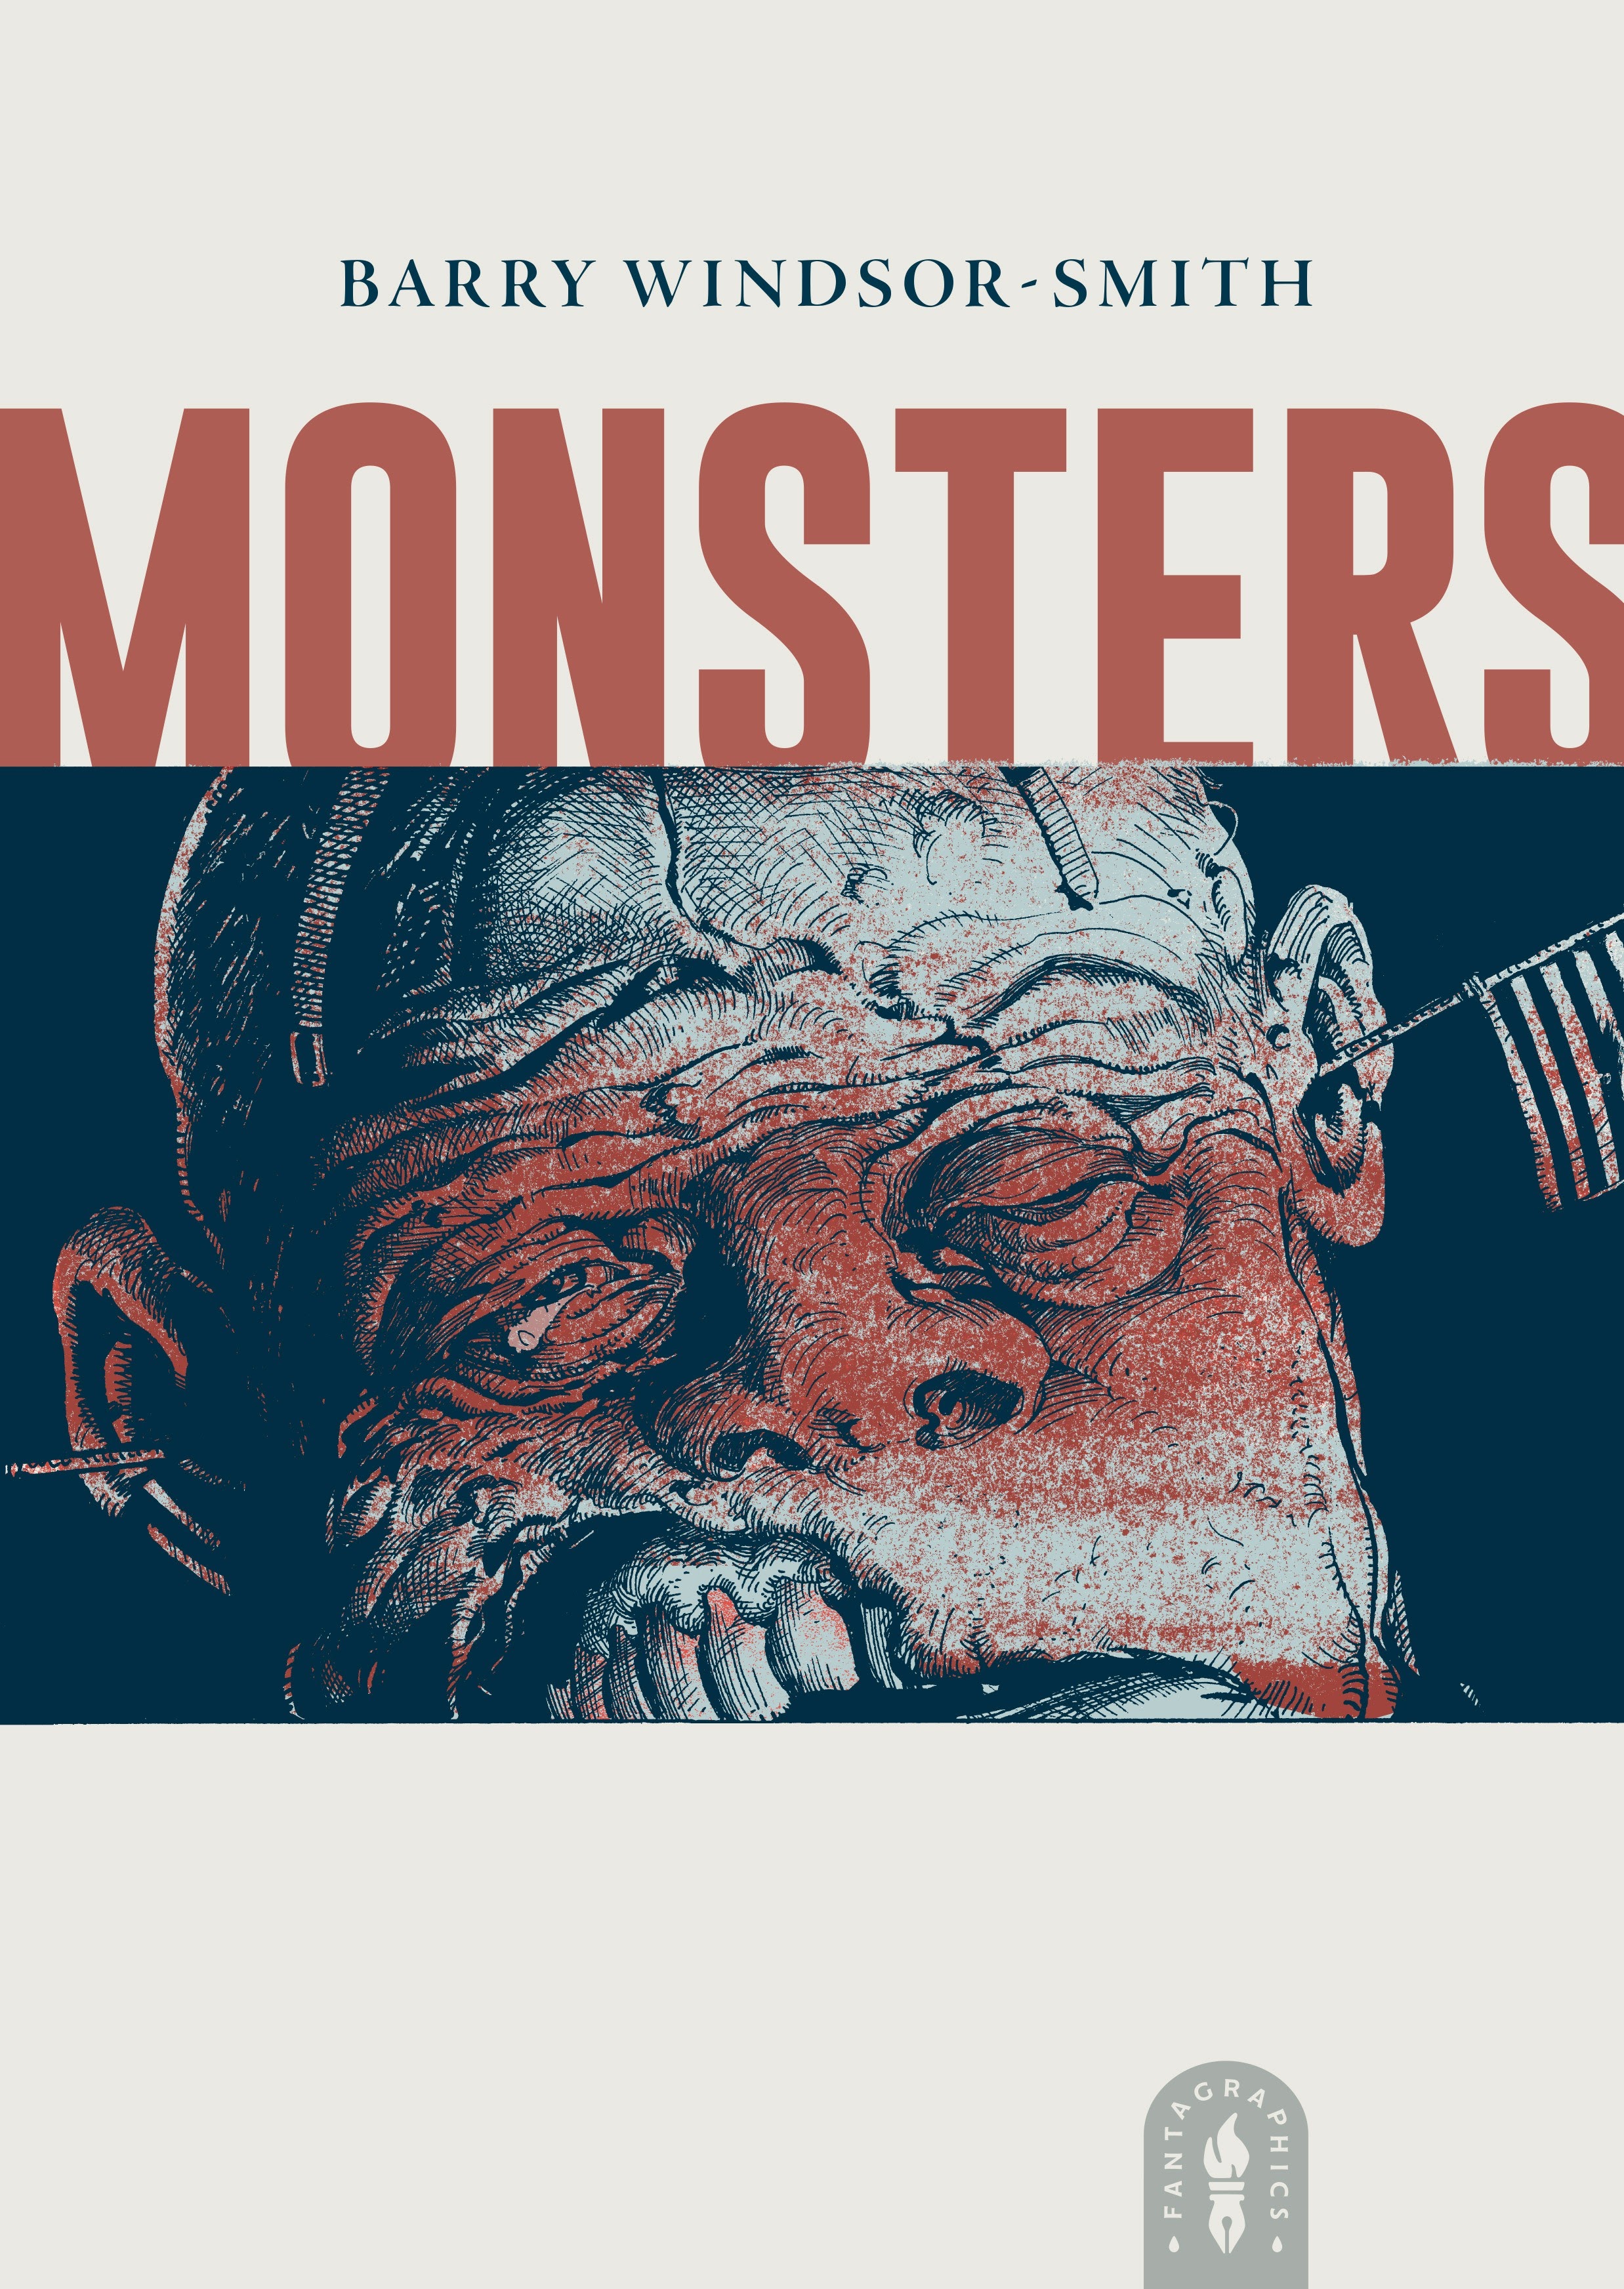 Read online Monsters comic -  Issue # TPB (Part 1) - 1